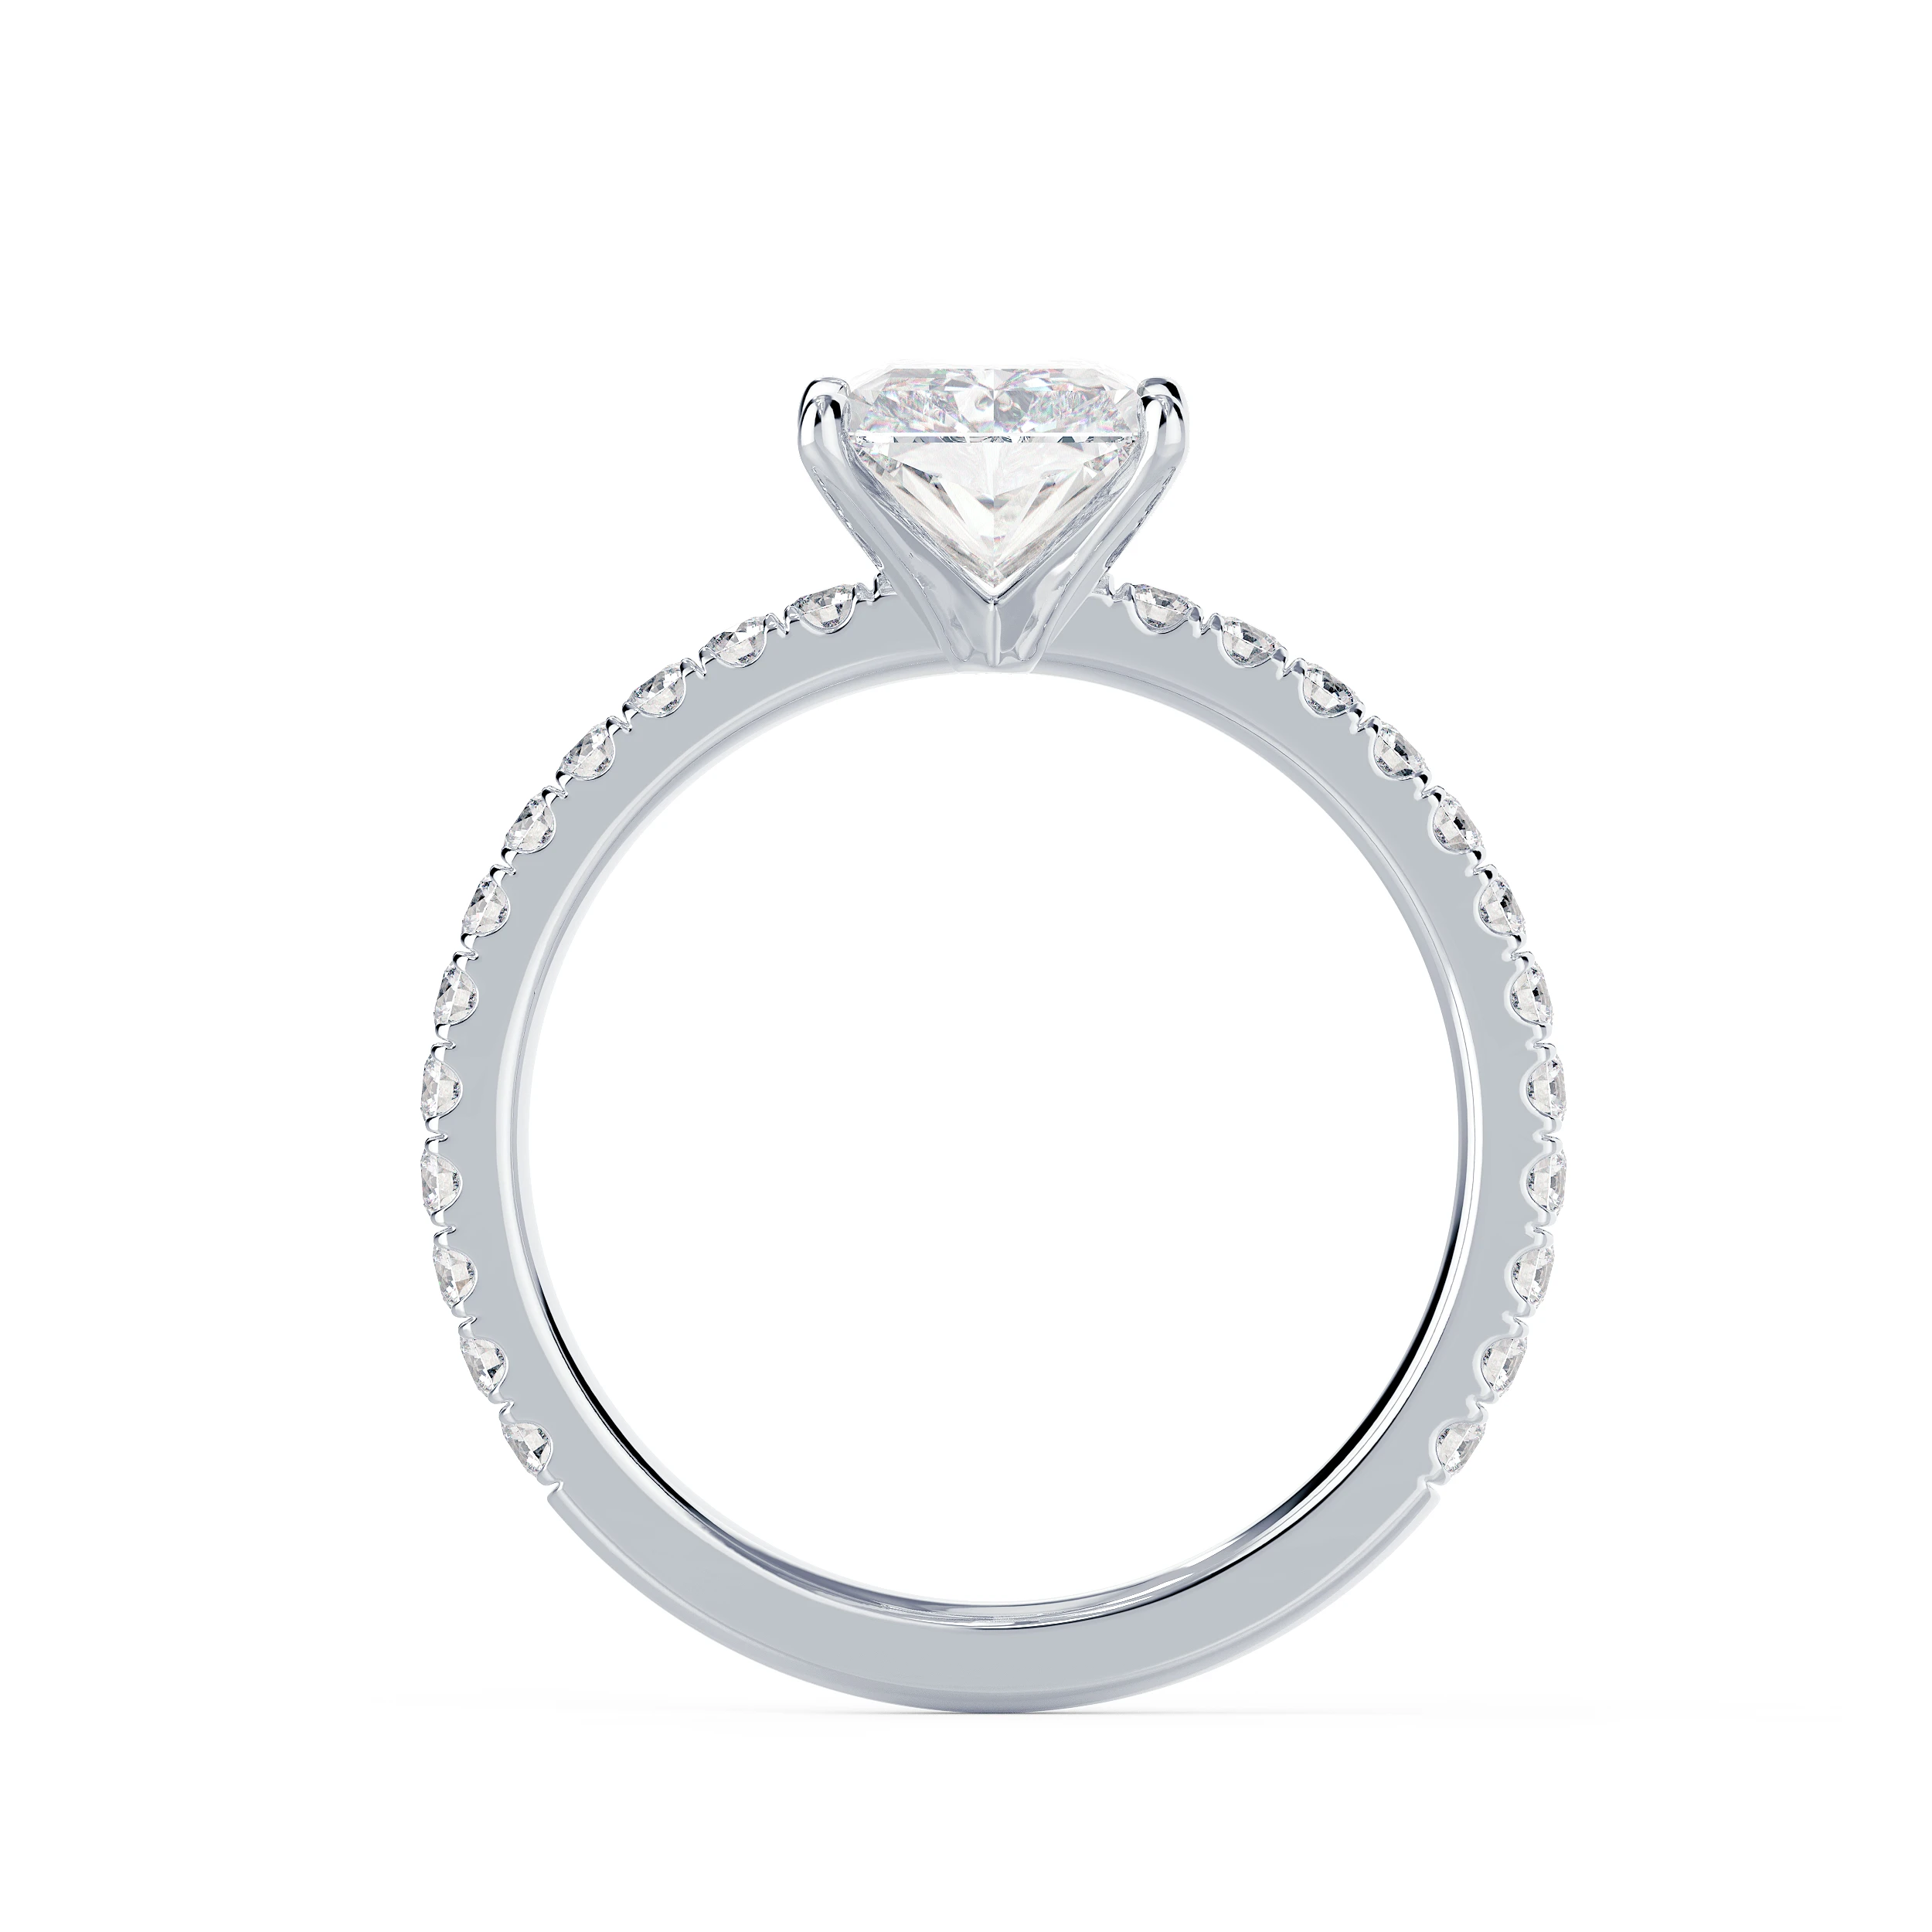 Diamonds Radiant Classic Four Prong Pavé Diamond Engagement Ring in White Gold (Profile View)